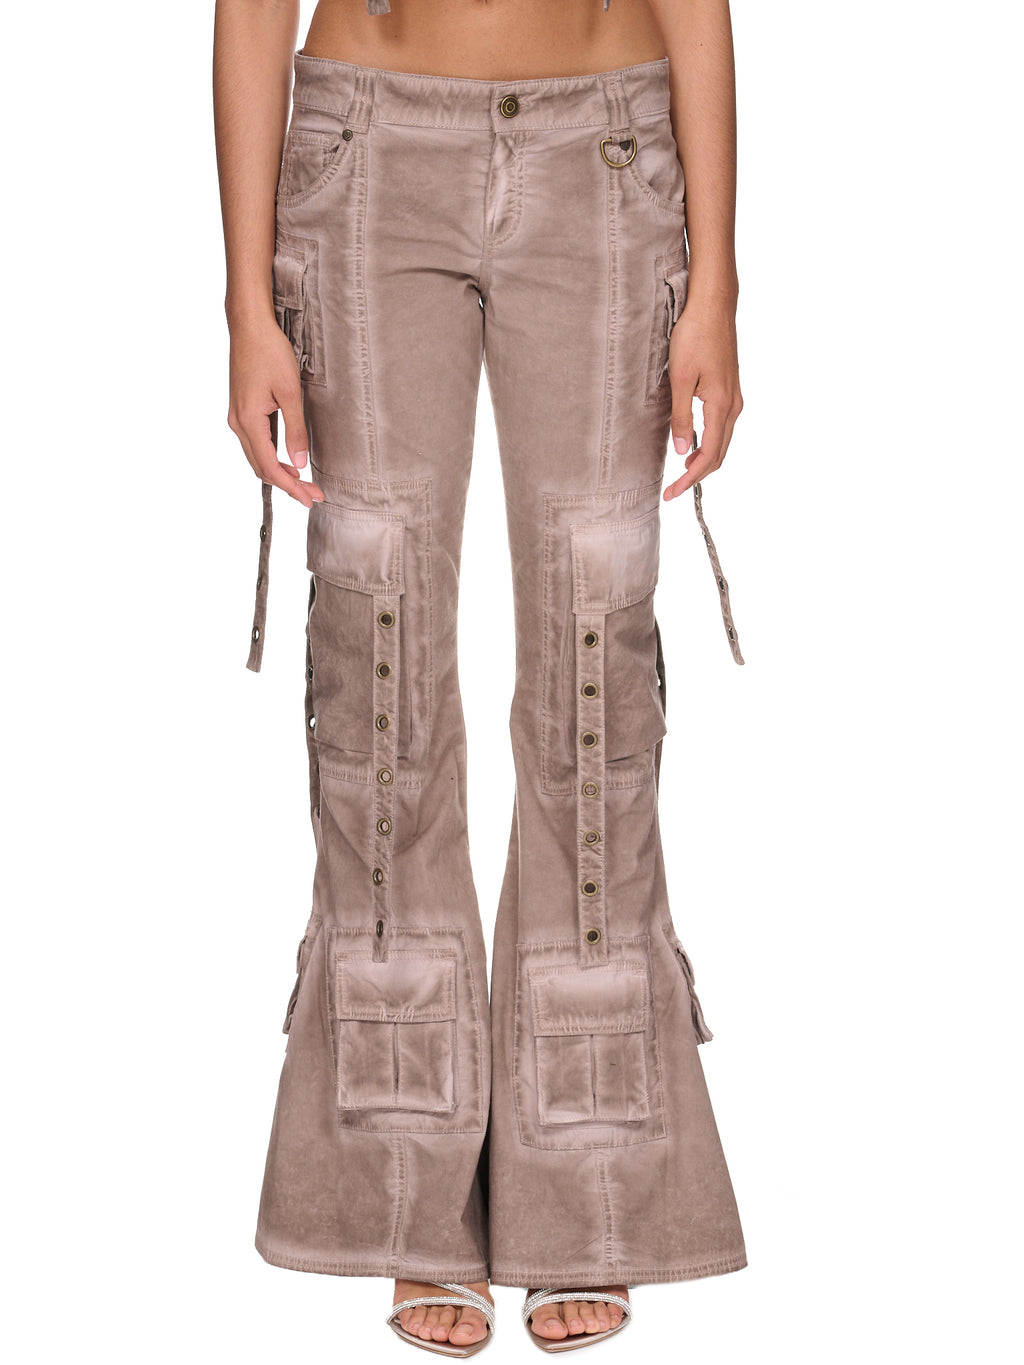 Mauro Stretch Cotton Twill Cuffed Cargo Jogger Pants in Burnt